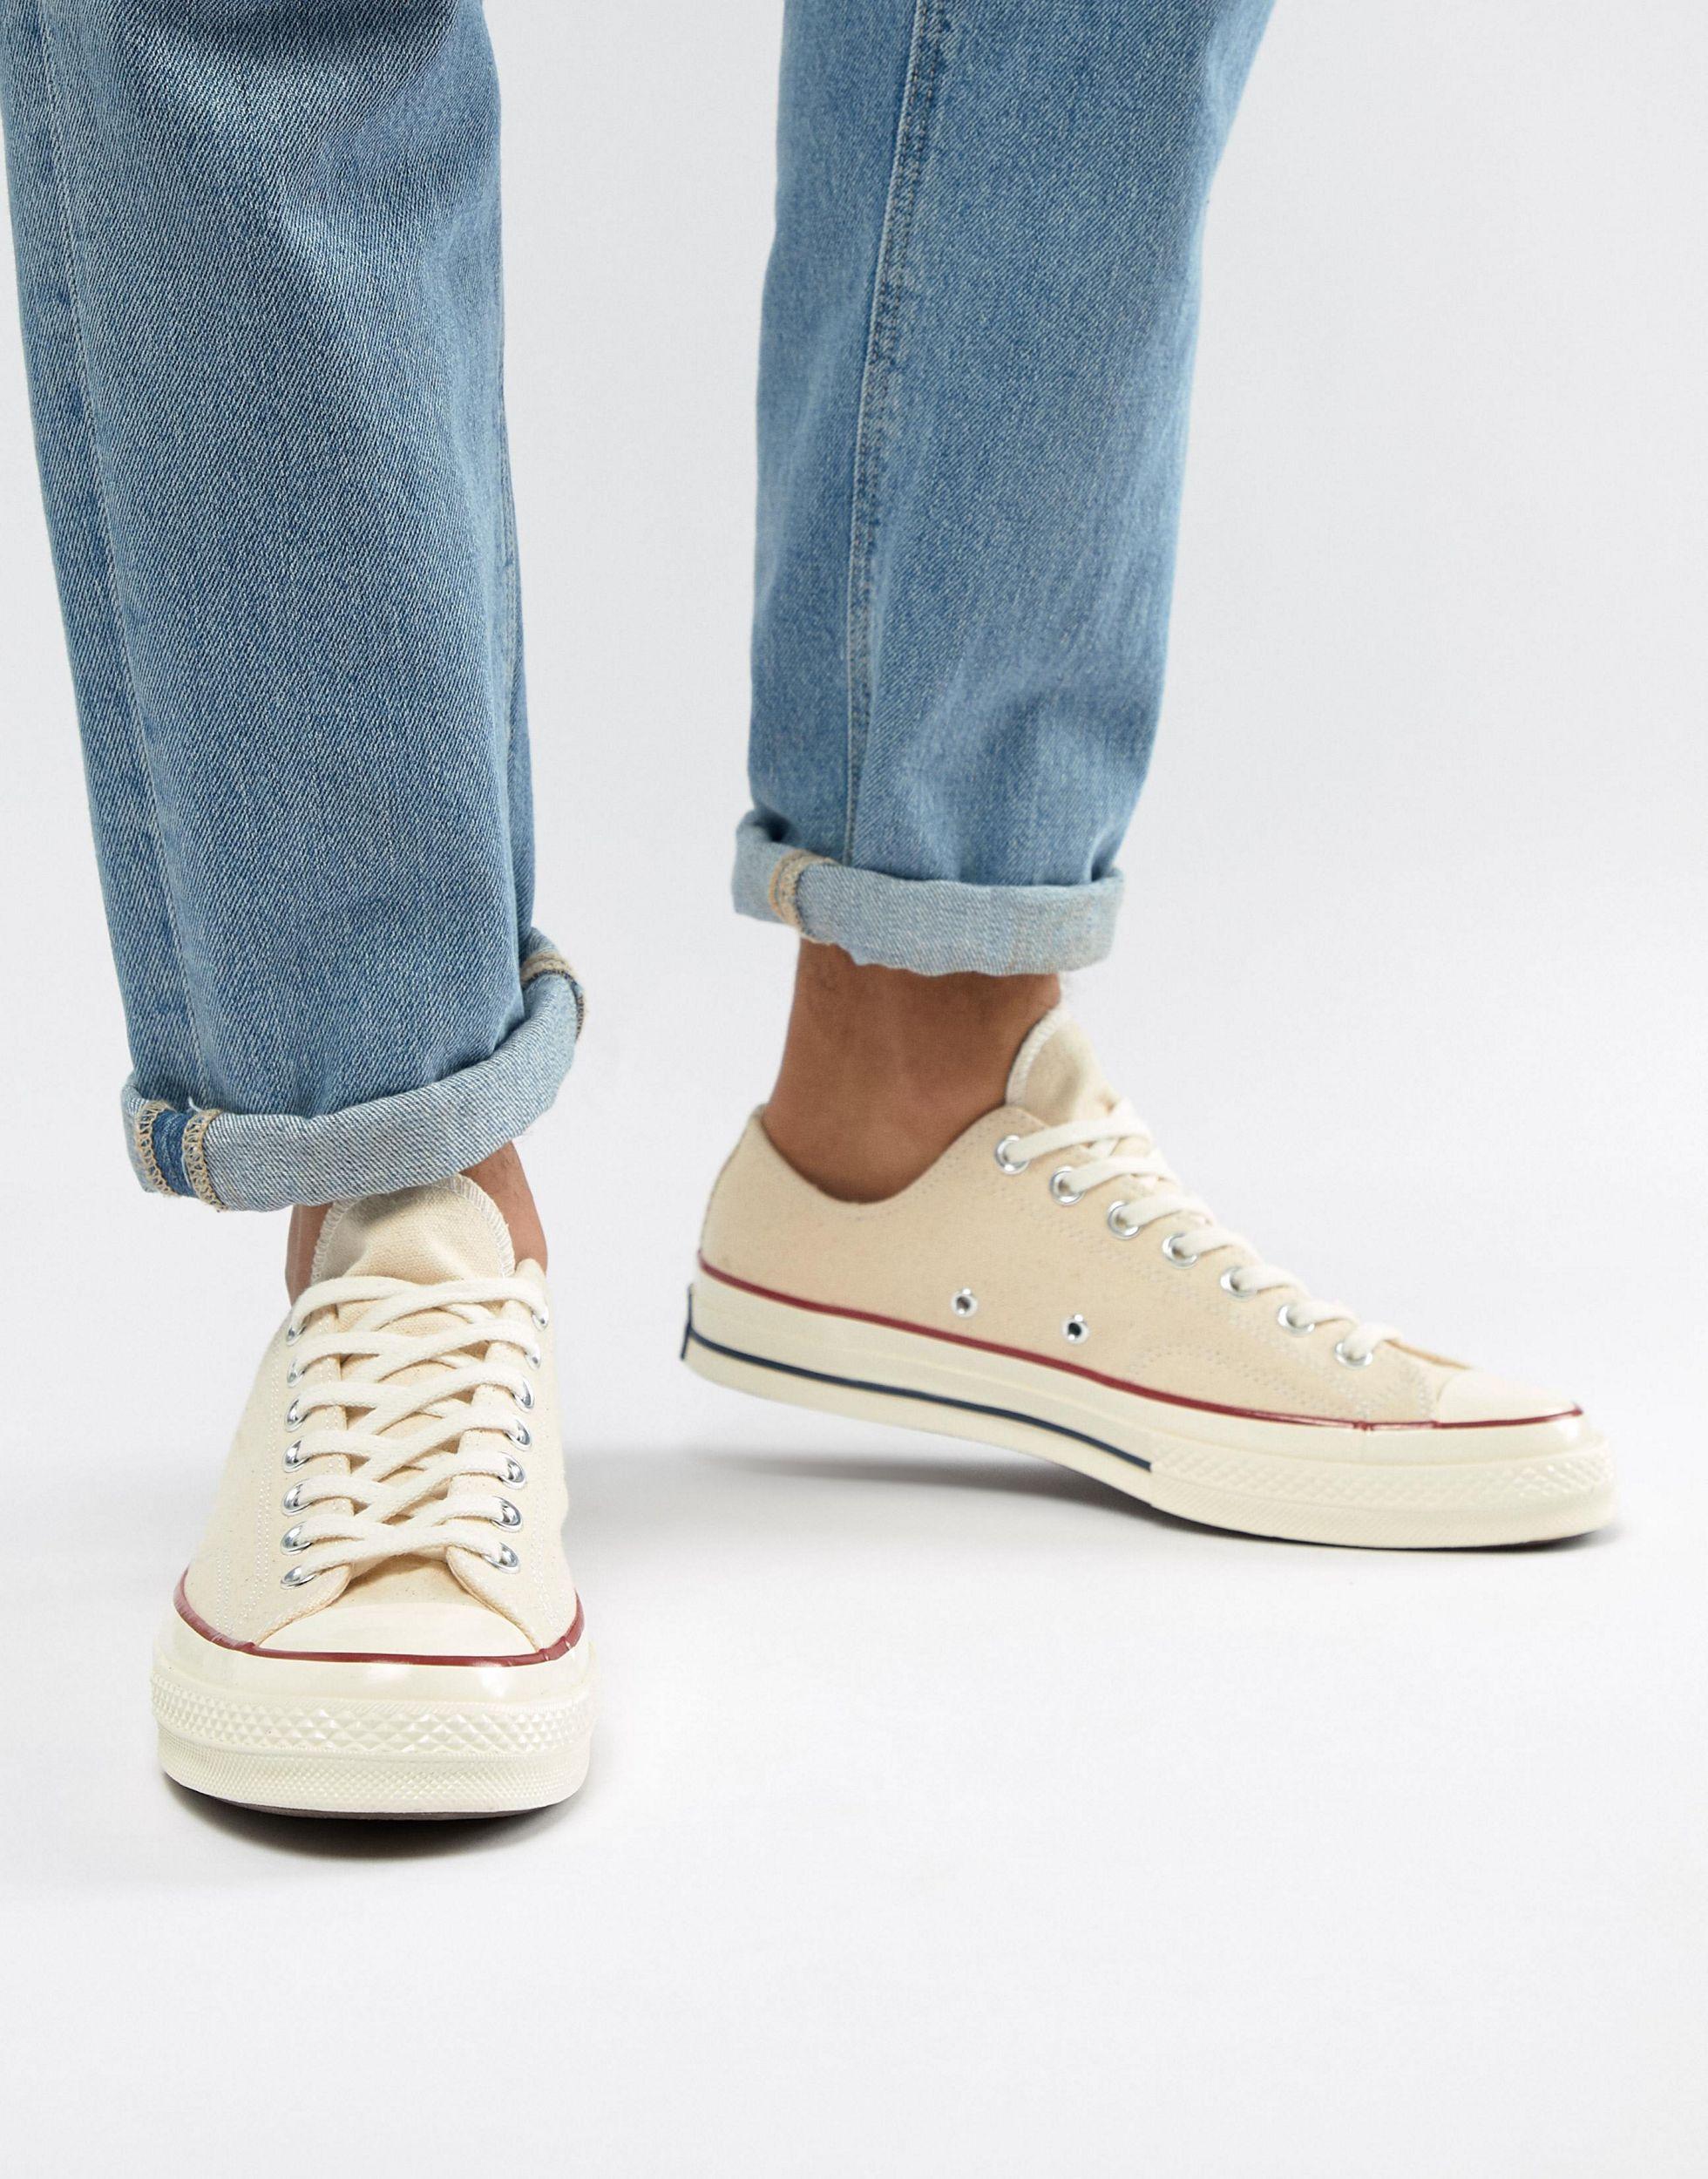 Converse Canvas White Chuck 70 Low Shoes for Men - Save 78% | Lyst